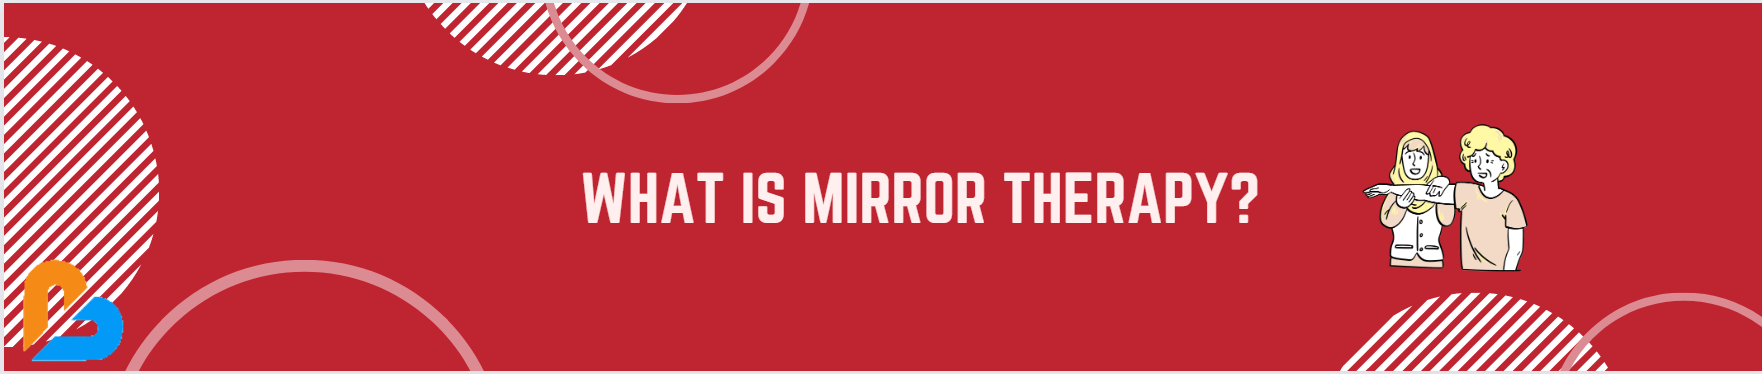 What is Mirror Therapy?